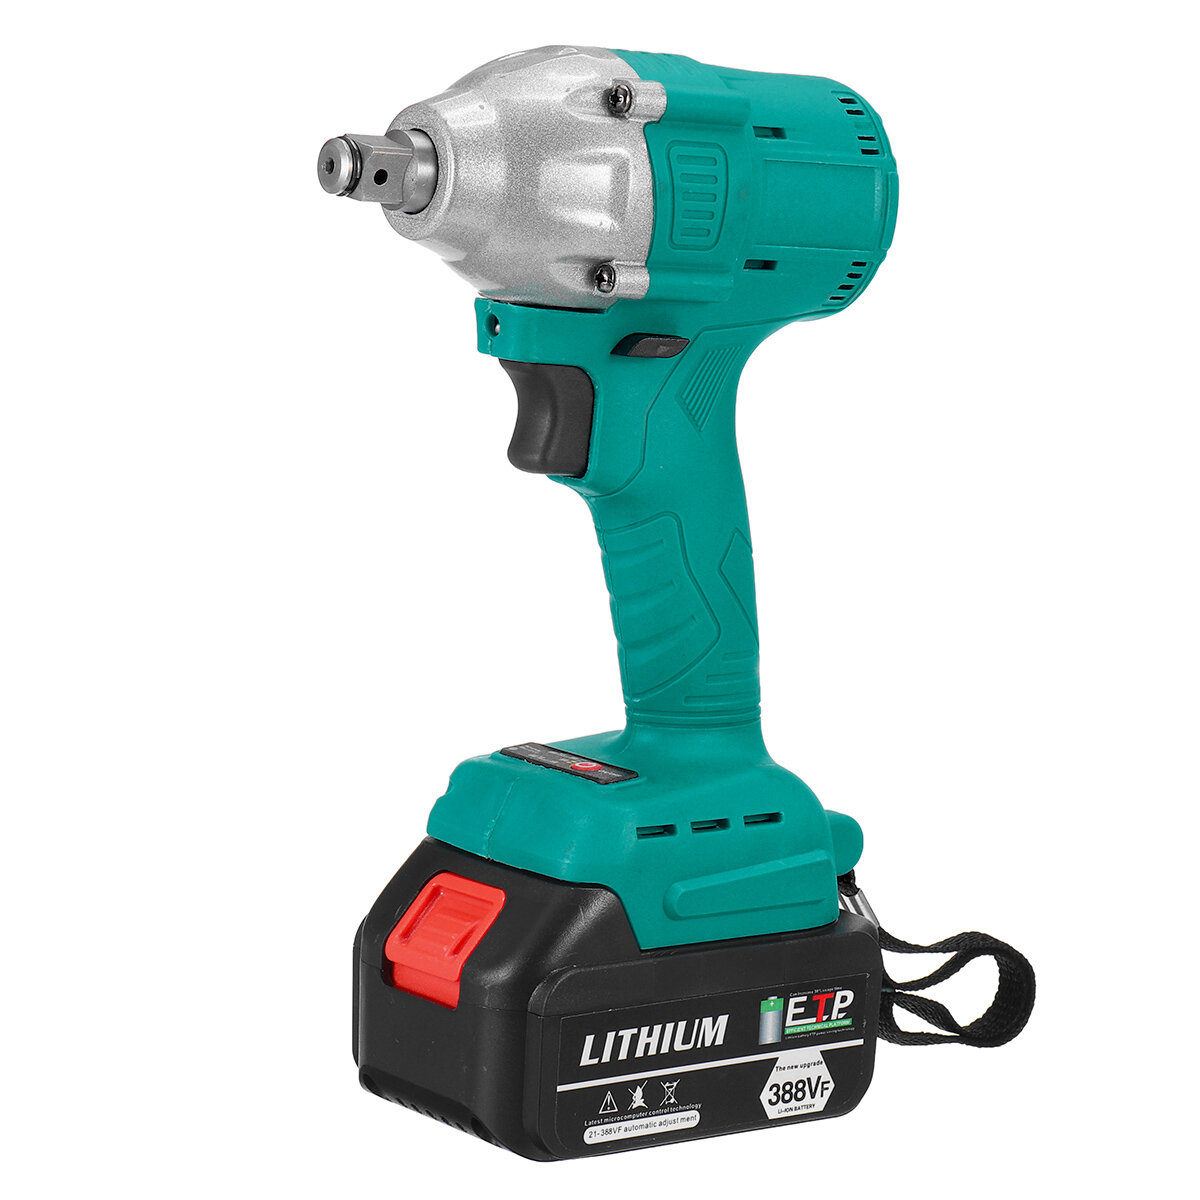 

22890mAh 388VF 850N.m Brushless Impact Wrench Cordless Handheld Electric Wrench W/ 1/2 Battery For Makita 18V Battery